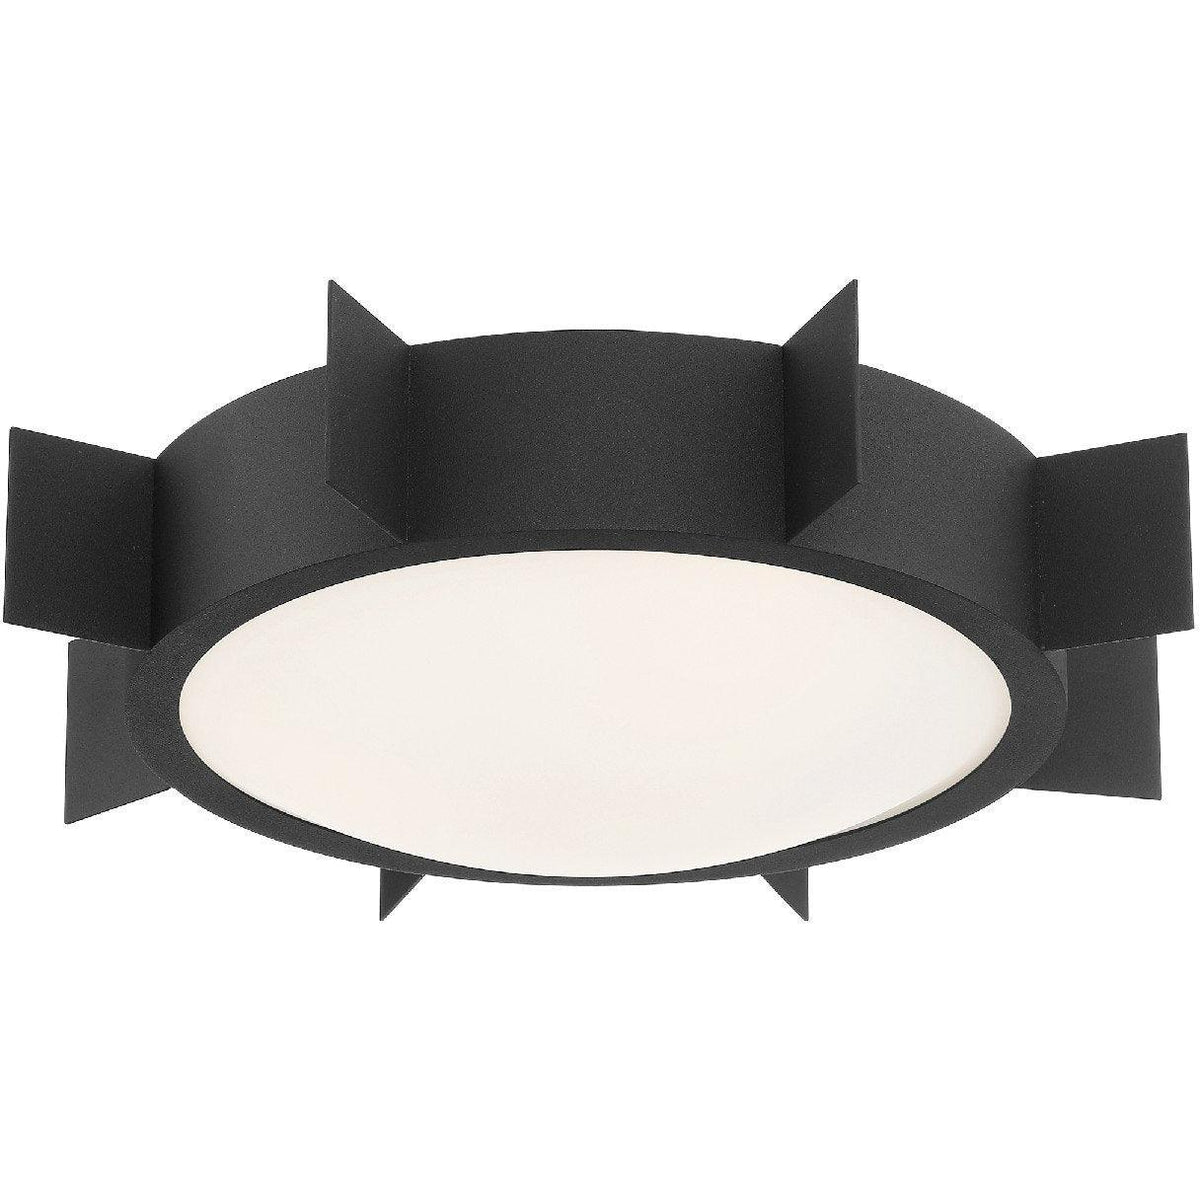 Crystorama - Solas Three Light Ceiling Mount - SOL-A3103-BF | Montreal Lighting & Hardware